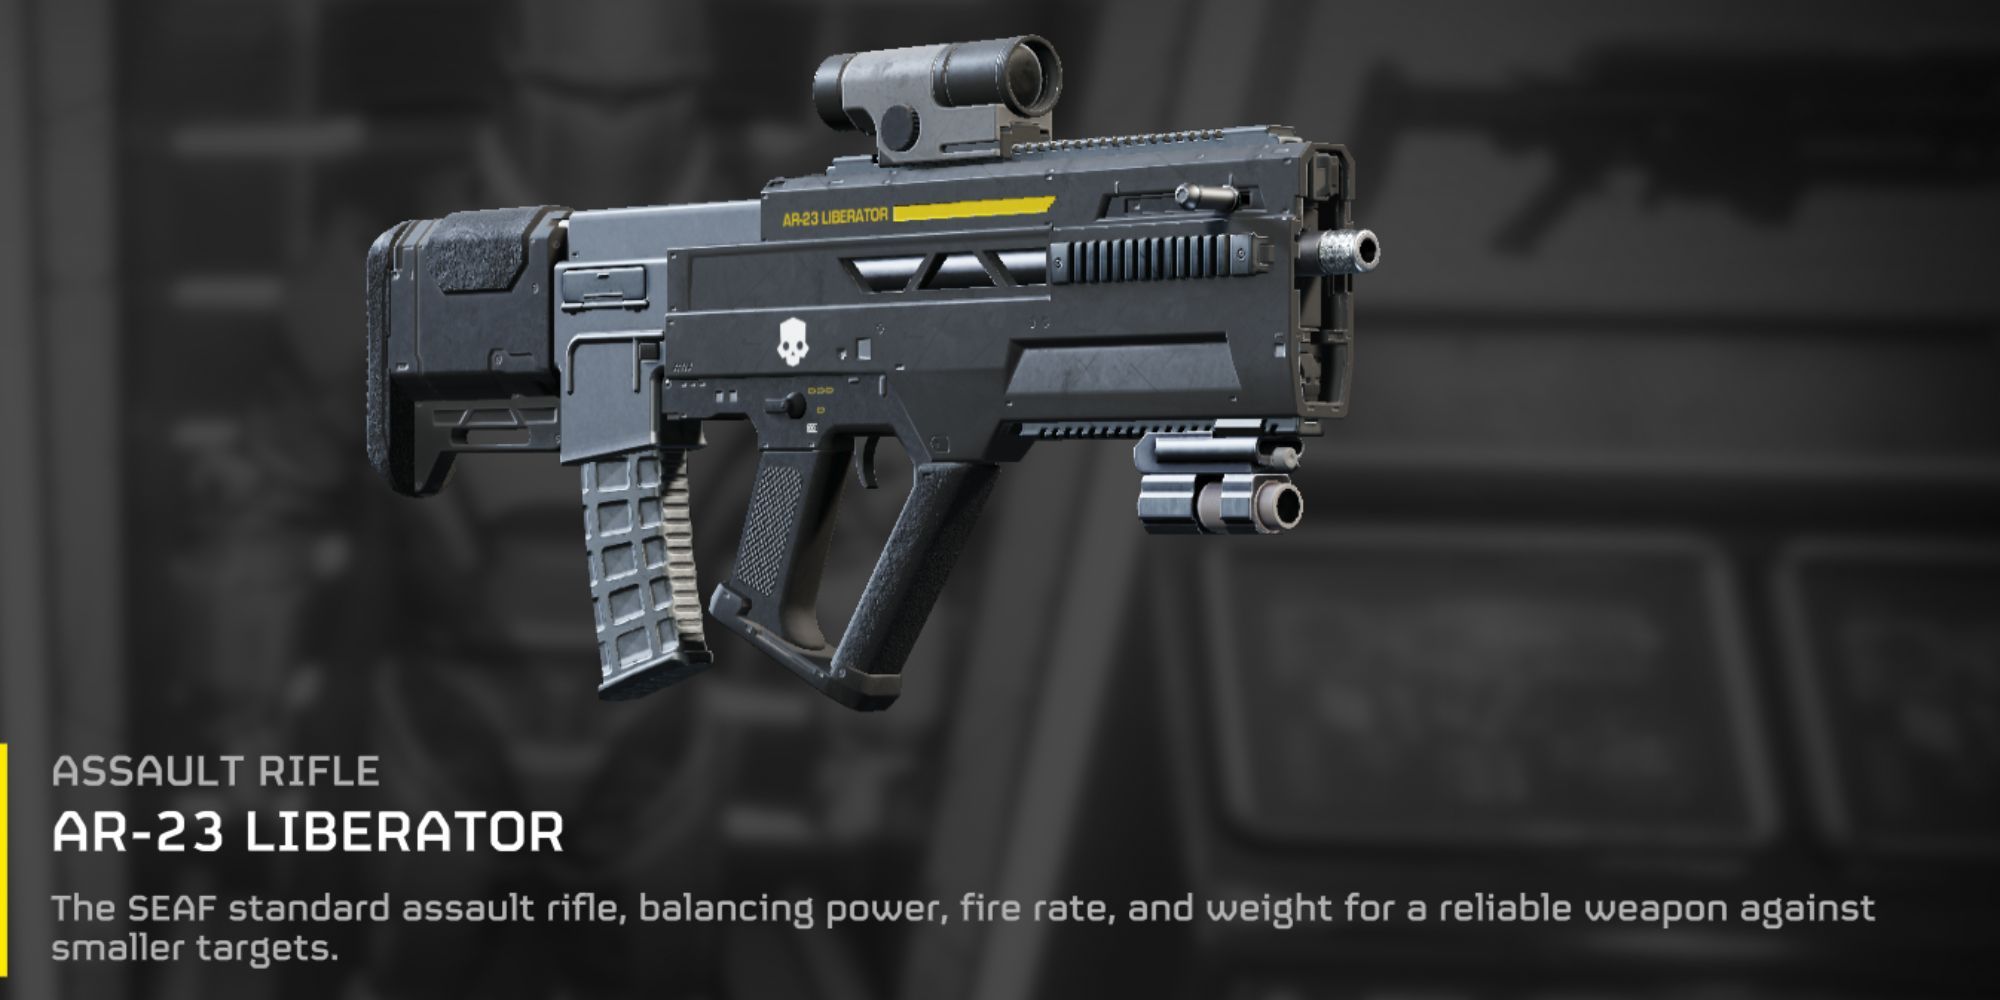 The AR-23 Liberator in a players' armory